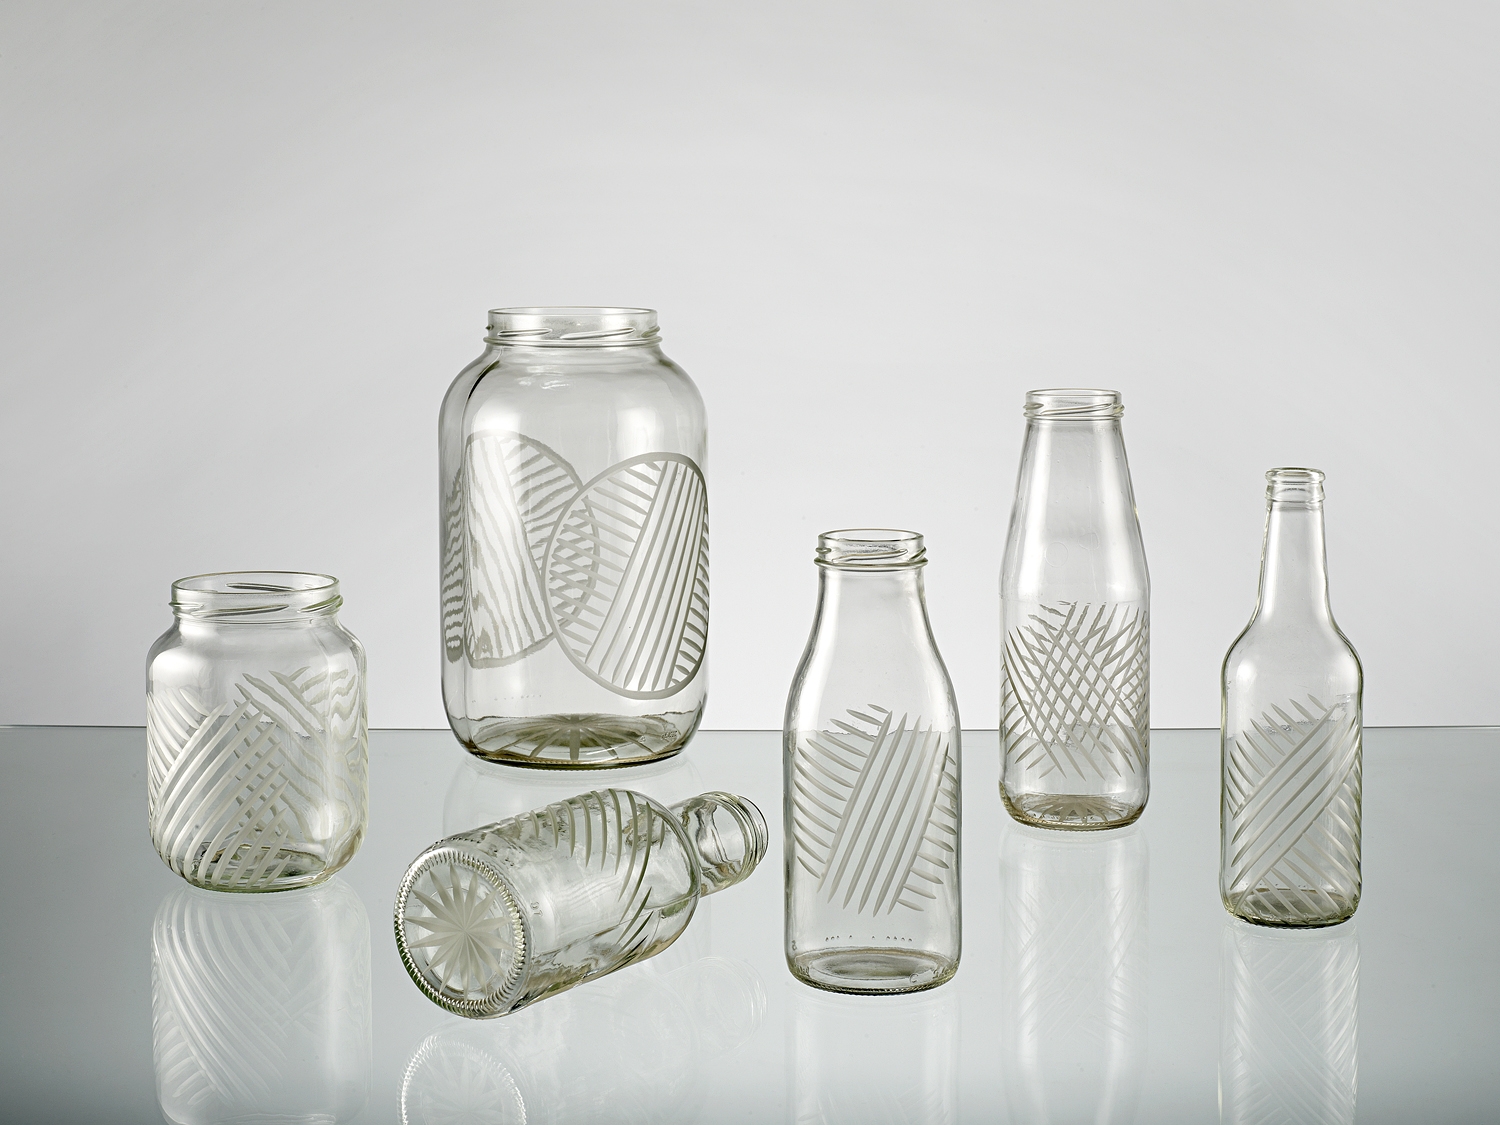 'Cut & Paste' and 'Upgrade', glass collections